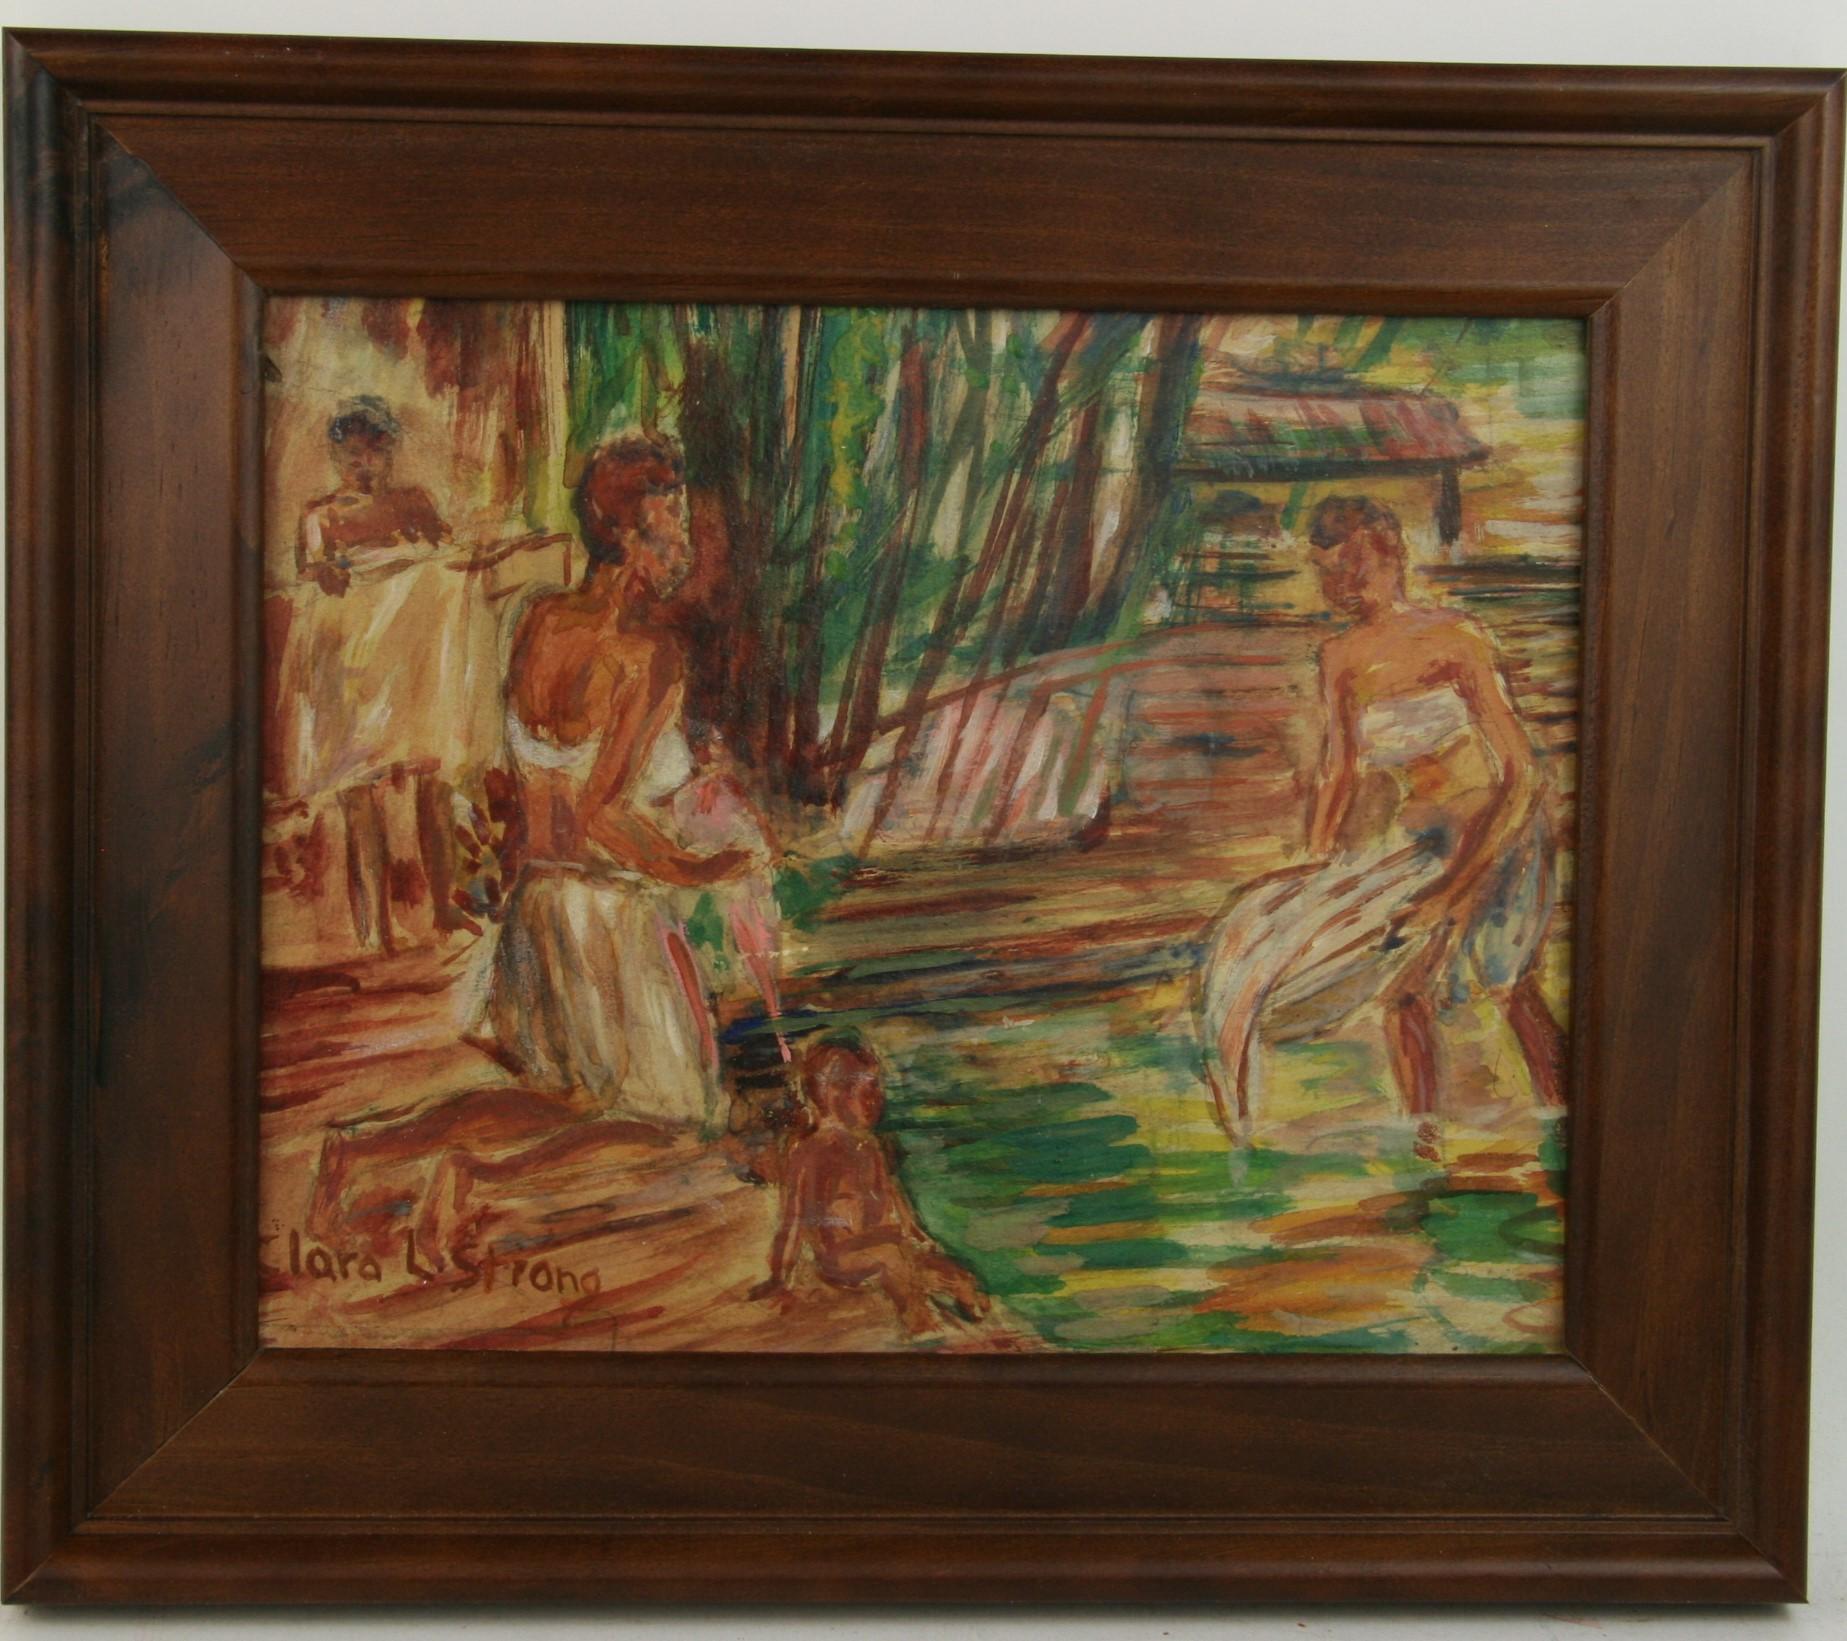 Clara L. Strong Figurative Painting - Antique Scandinavian Bathers at the Stream Figurative Landscape